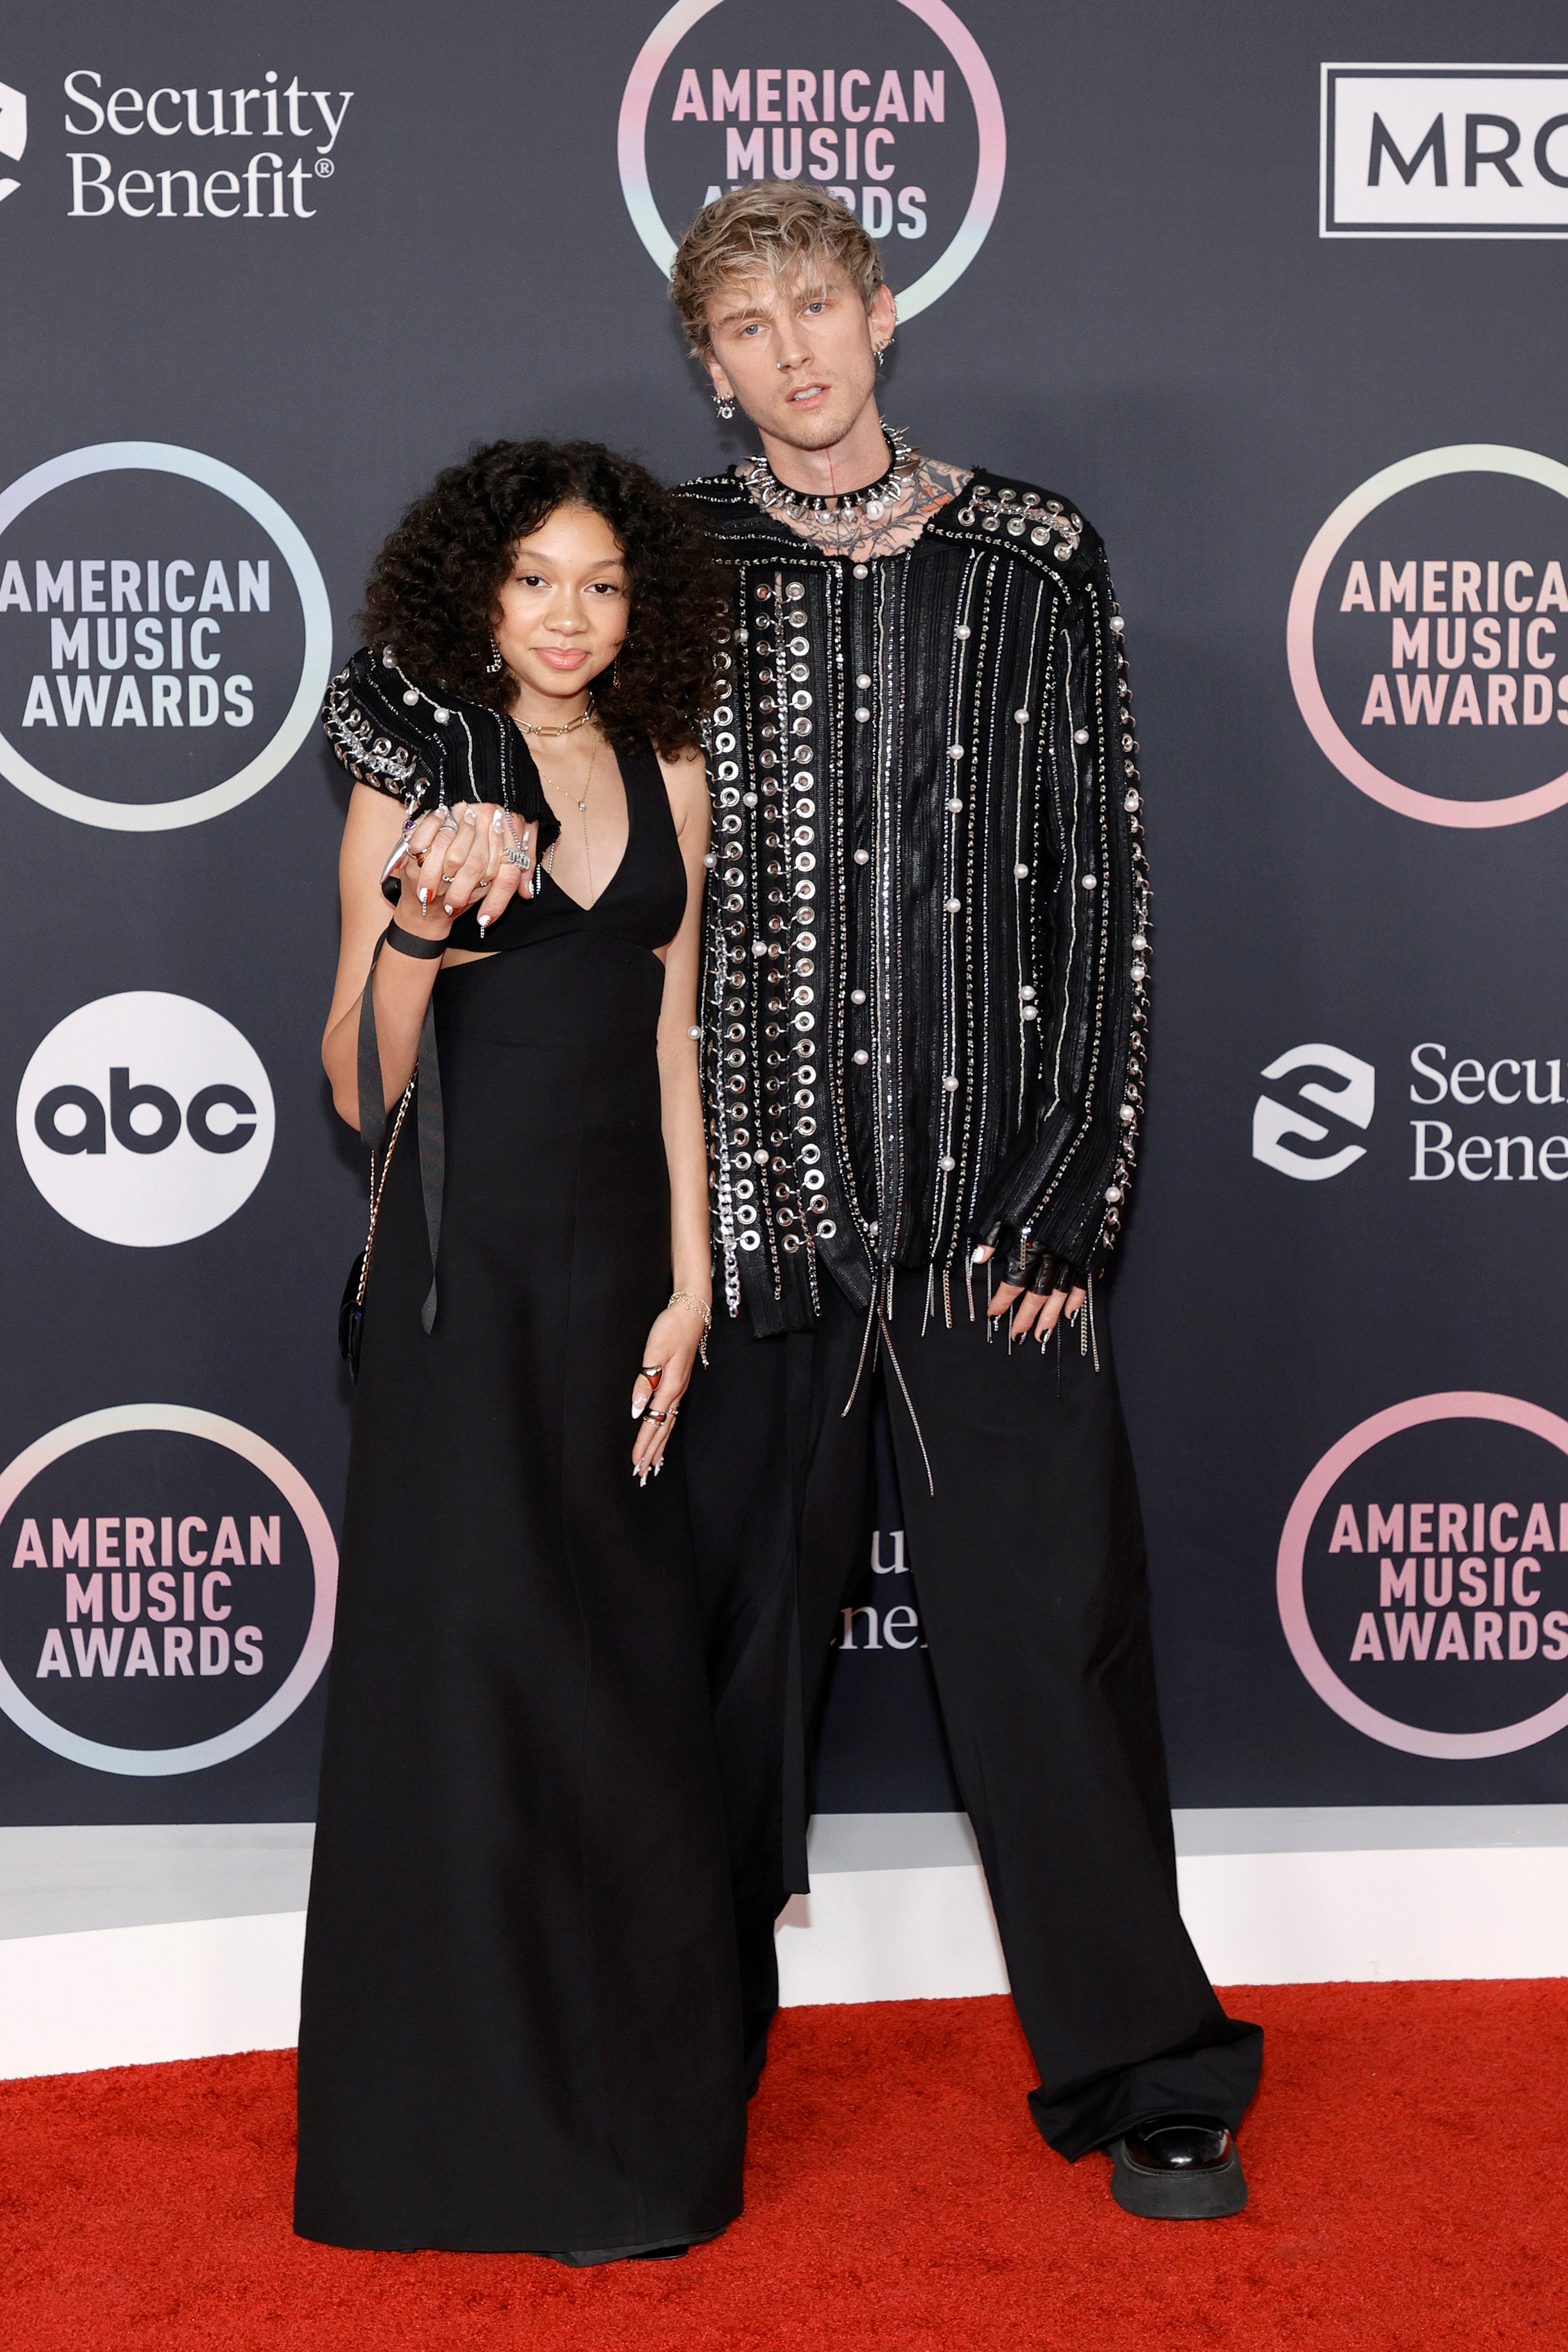 Casie Colson Baker and Machine Gun Kelly attend the 2021 American Music Awards